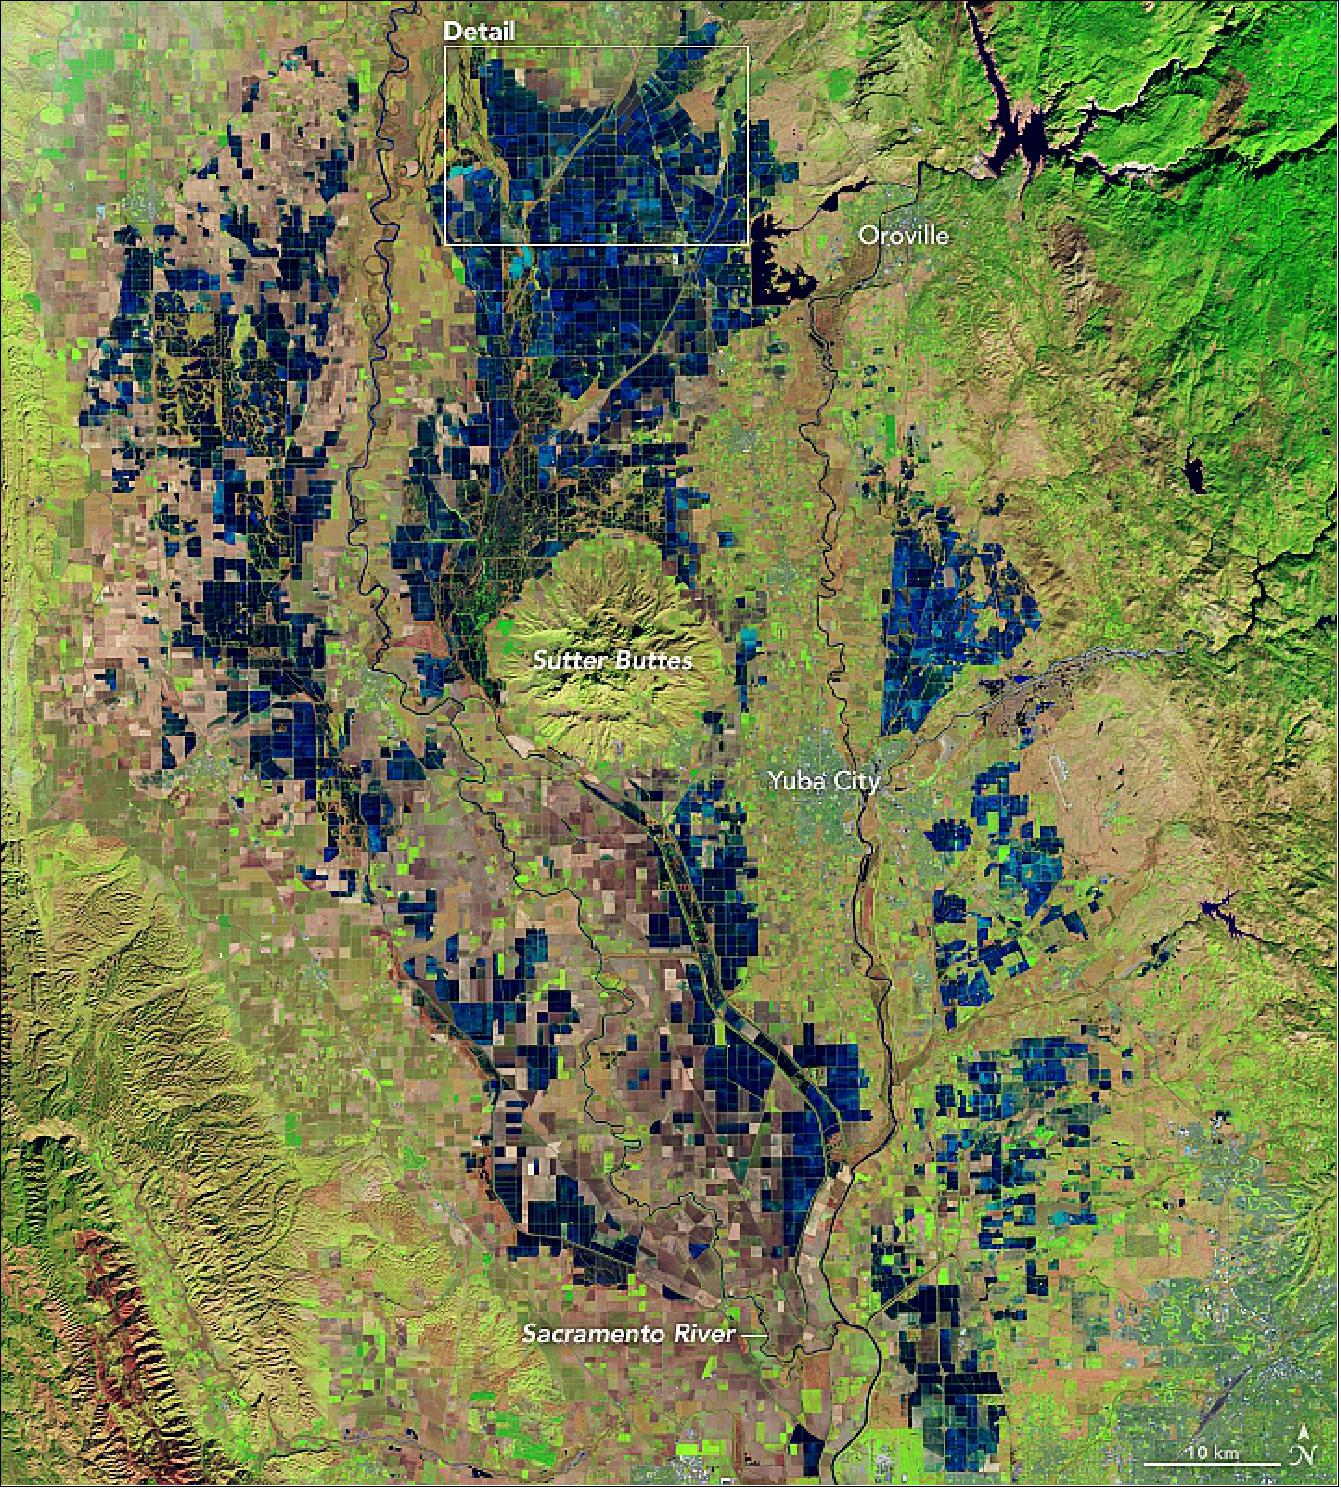 Figure 90: OLI on Landsat-8 acquired this false-color image using a combination of shortwave infrared, near infrared, and visible light (bands 6-5-4) on 26 December 2018. The image highlights the patchwork of flooded rice fields along the Sacramento and Feather Rivers. Inundated fields appear dark blue; vegetation is bright green. A series of raised levees form the grid pattern between the fields (image credit: NASA Earth Observatory, image by Lauren Dauphin, using Landsat data from the U.S. Geological Survey, story by Adam Voiland)